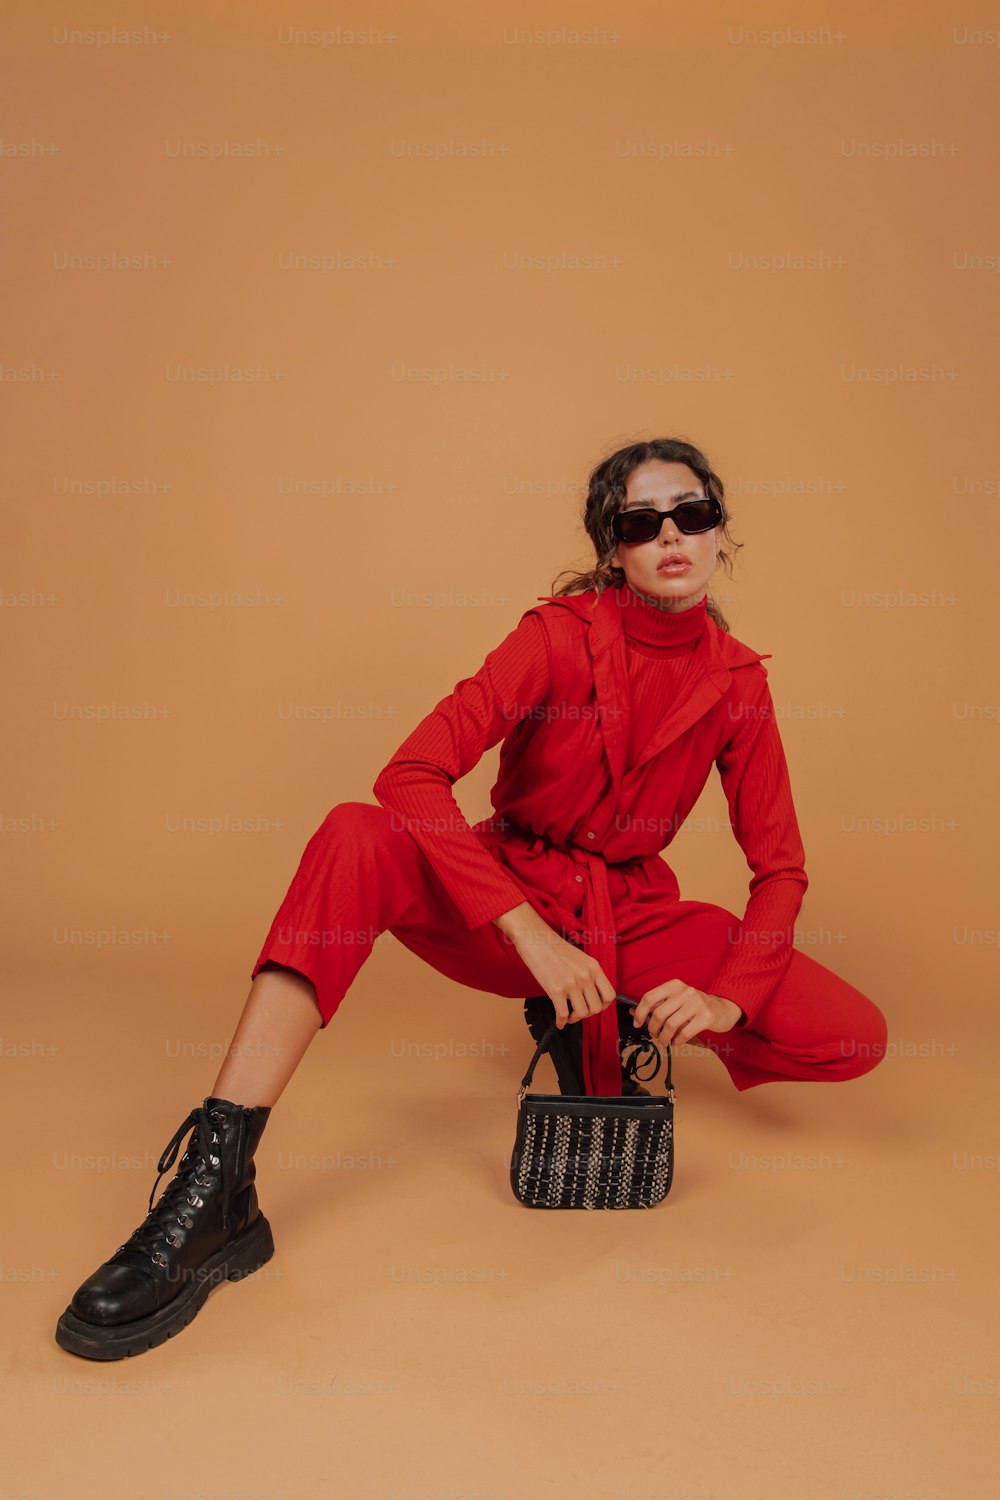 a woman in a red jumpsuit holding a purse